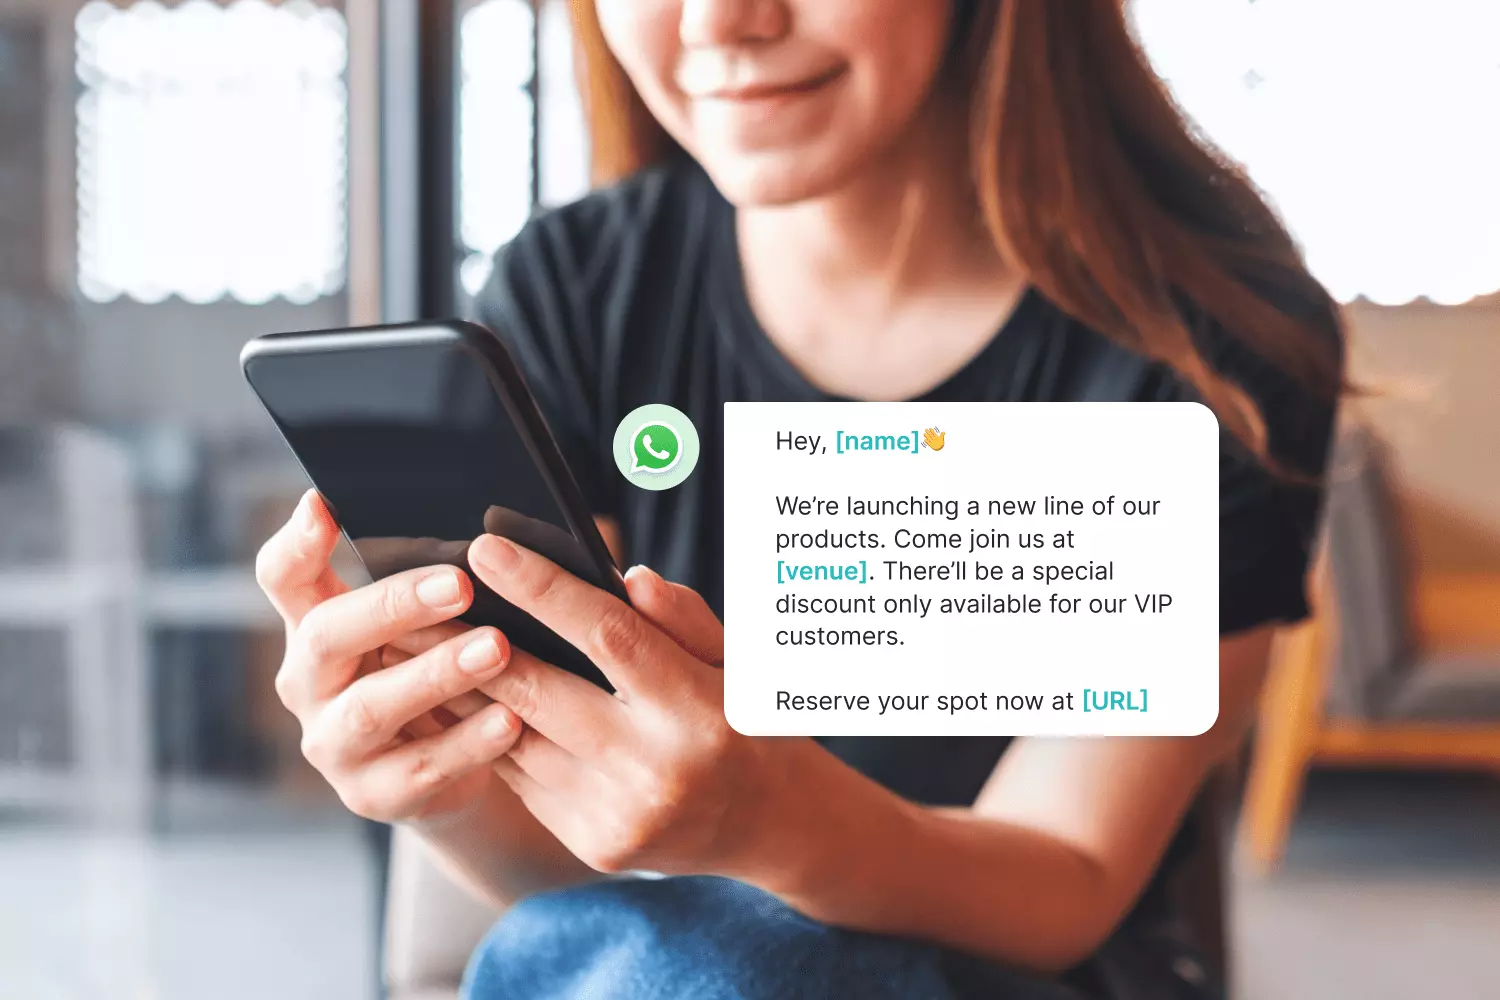 How To Send Event Invitation Messages On WhatsApp